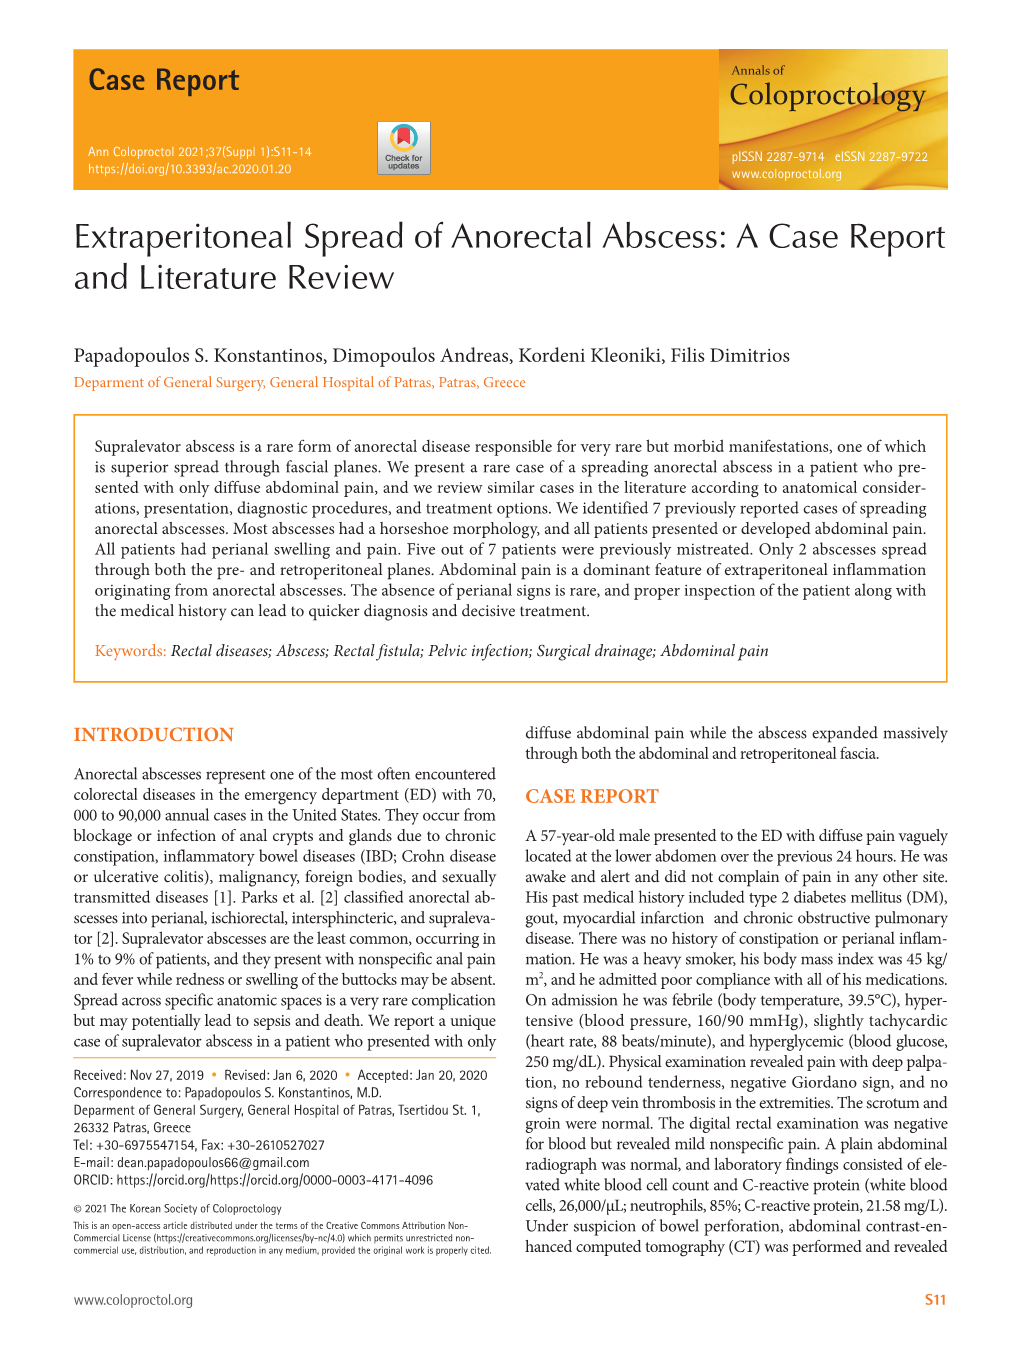 Extraperitoneal Spread of Anorectal Abscess: a Case Report and Literature Review